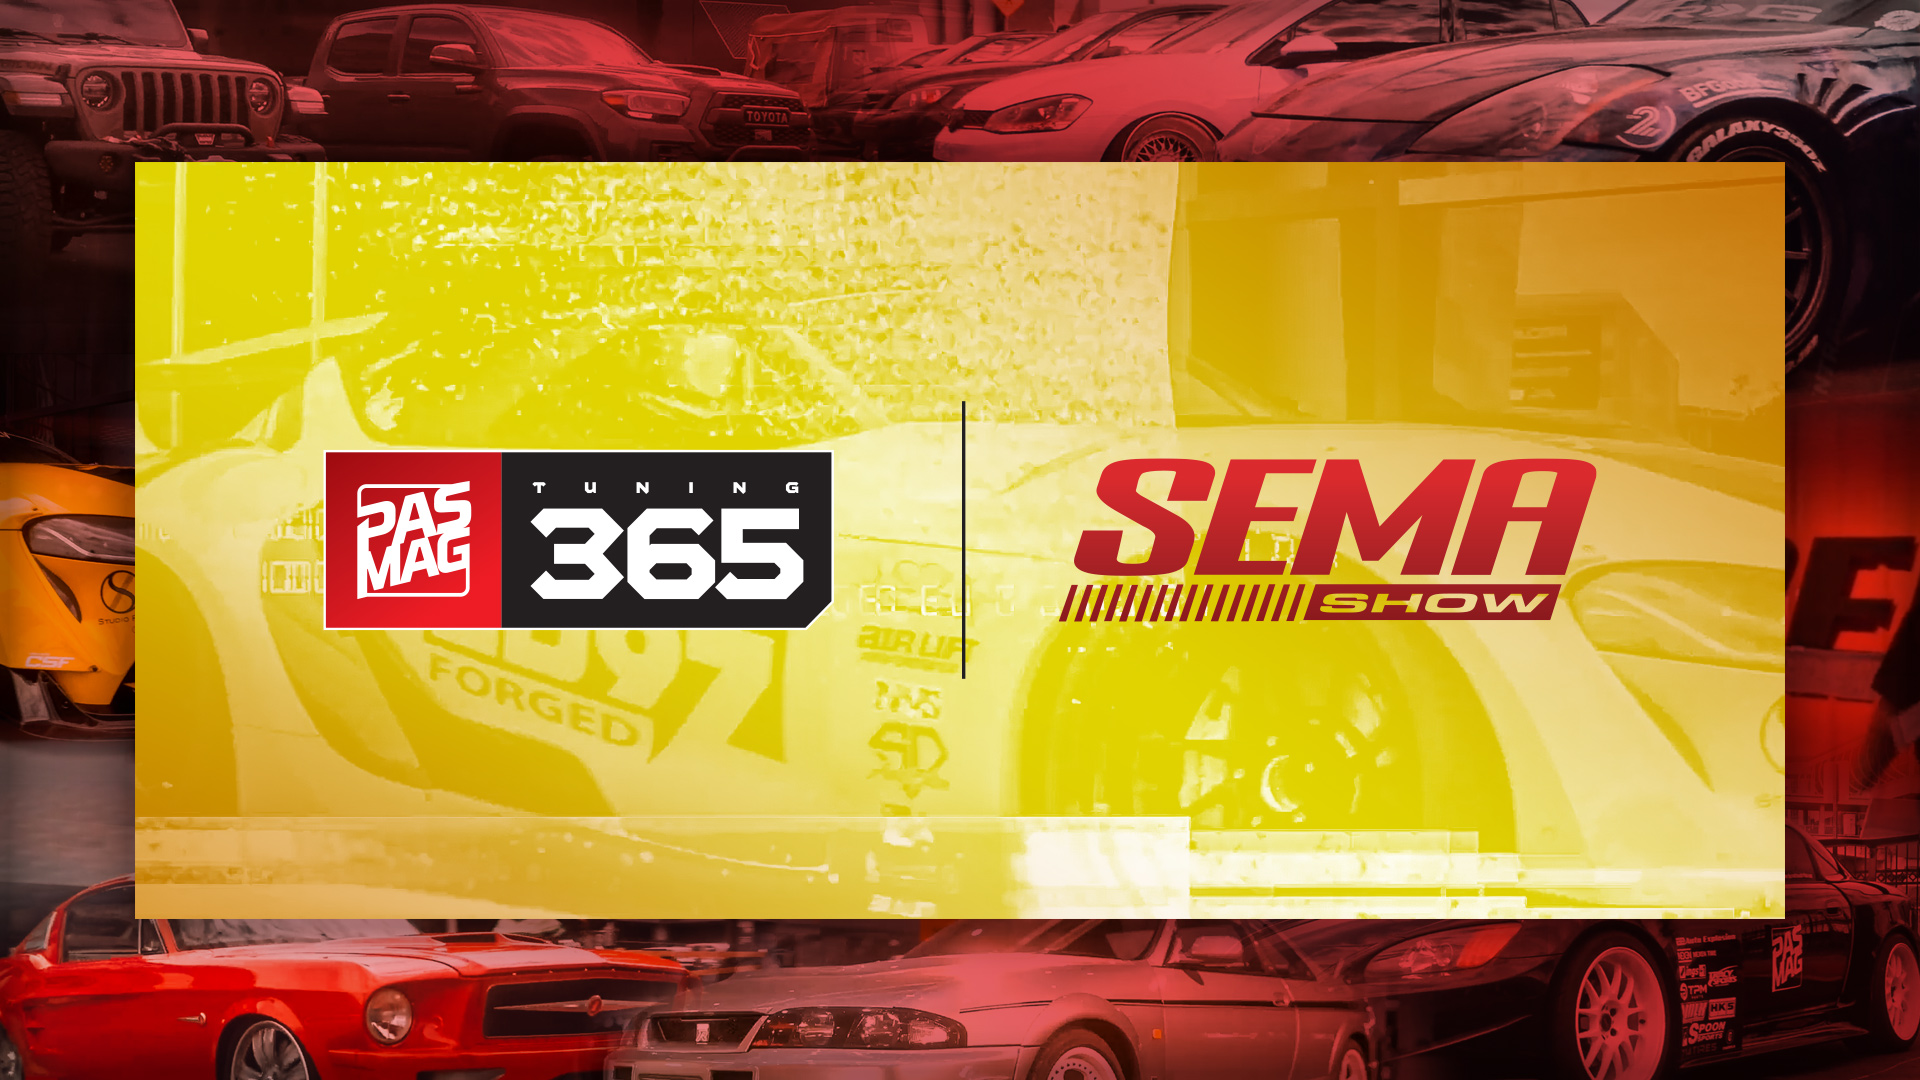 Mequiar's Announces New Products at SEMA